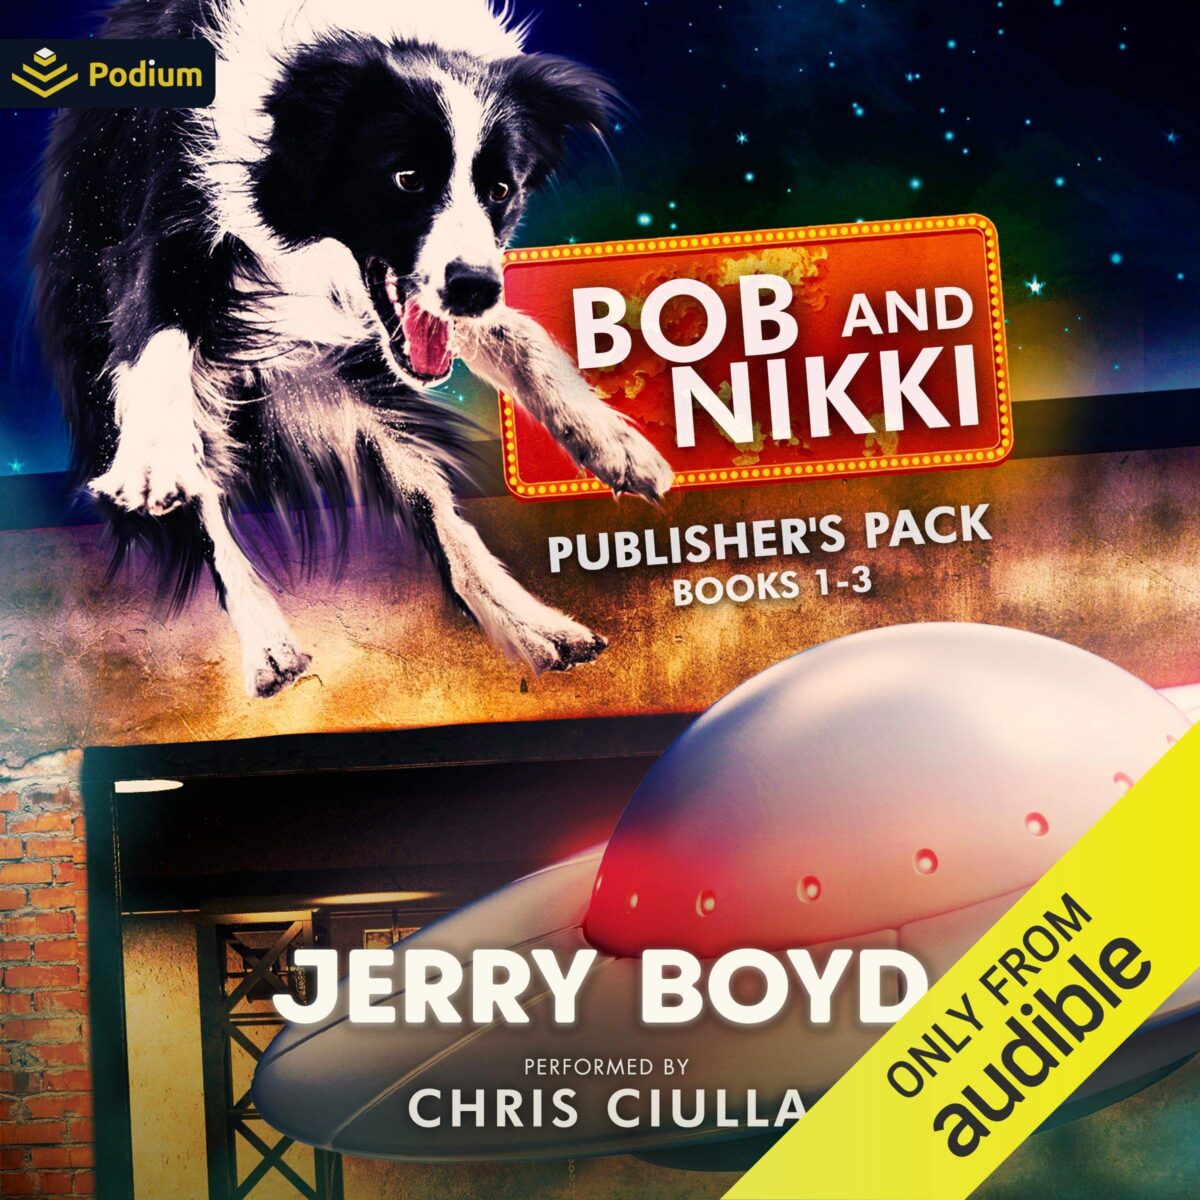 Bob and Nikki: Publisher’s Pack